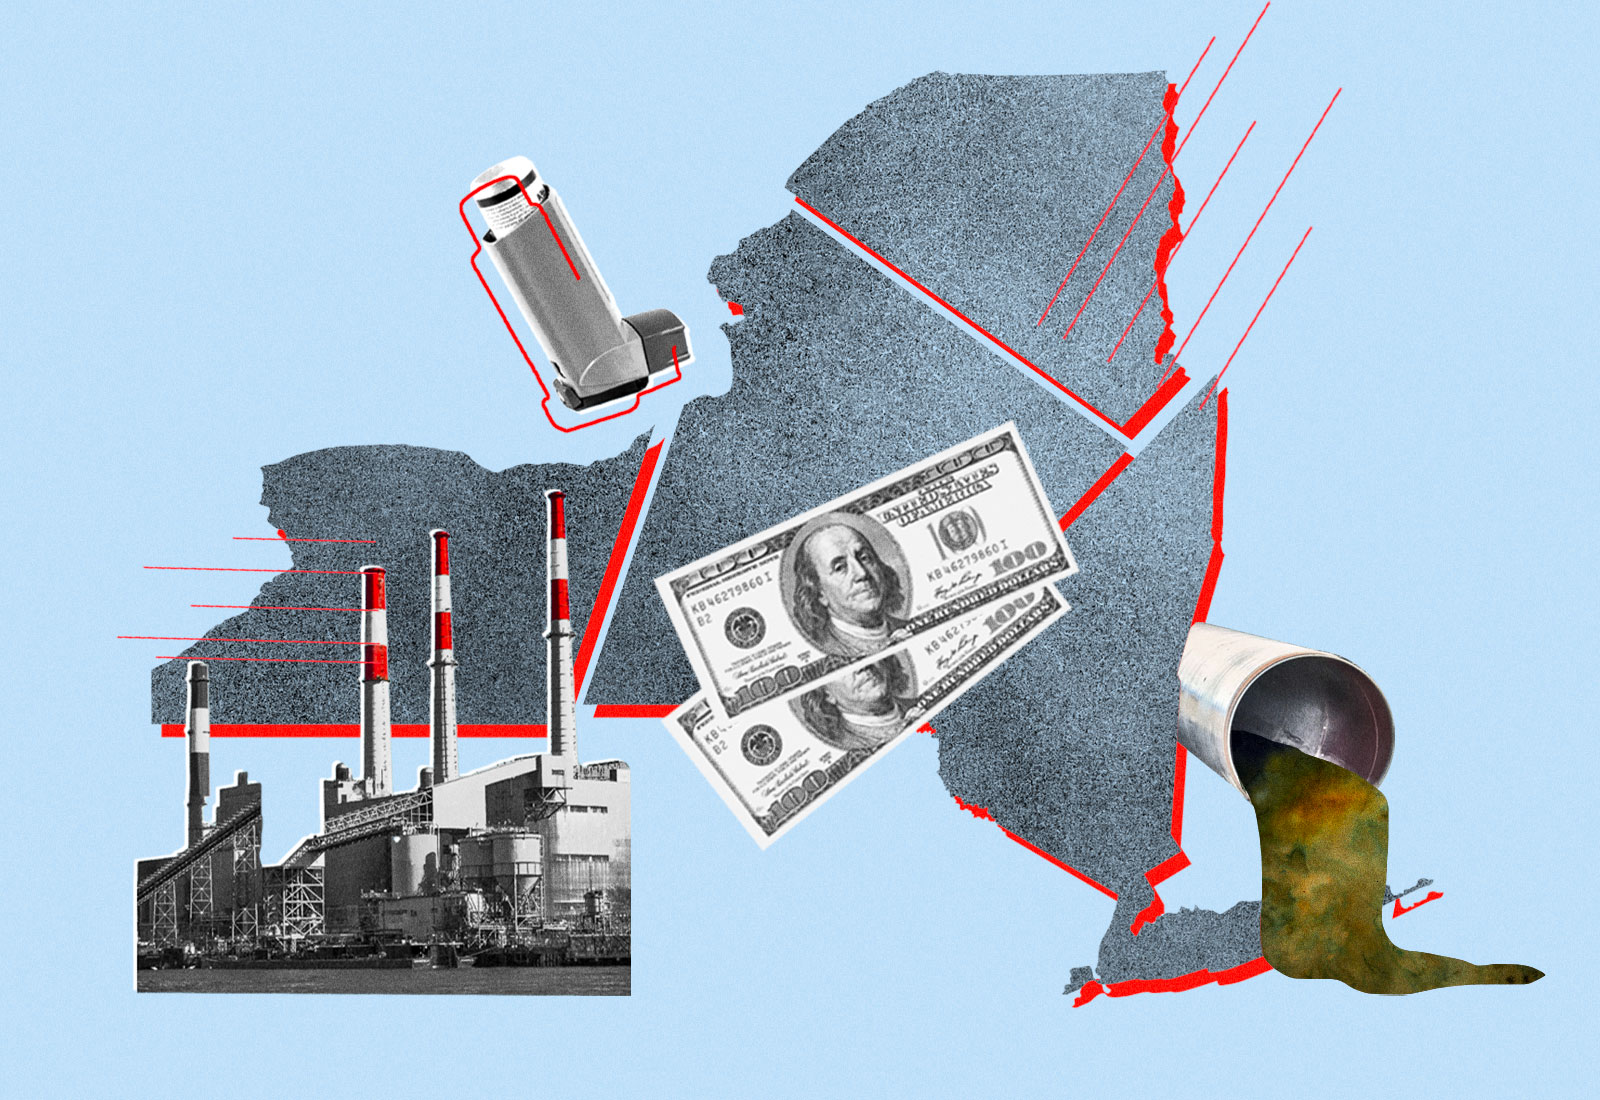 Collage: New York state split into sections, an asthma inhaler, smokestacks, money, and a sewage pipe